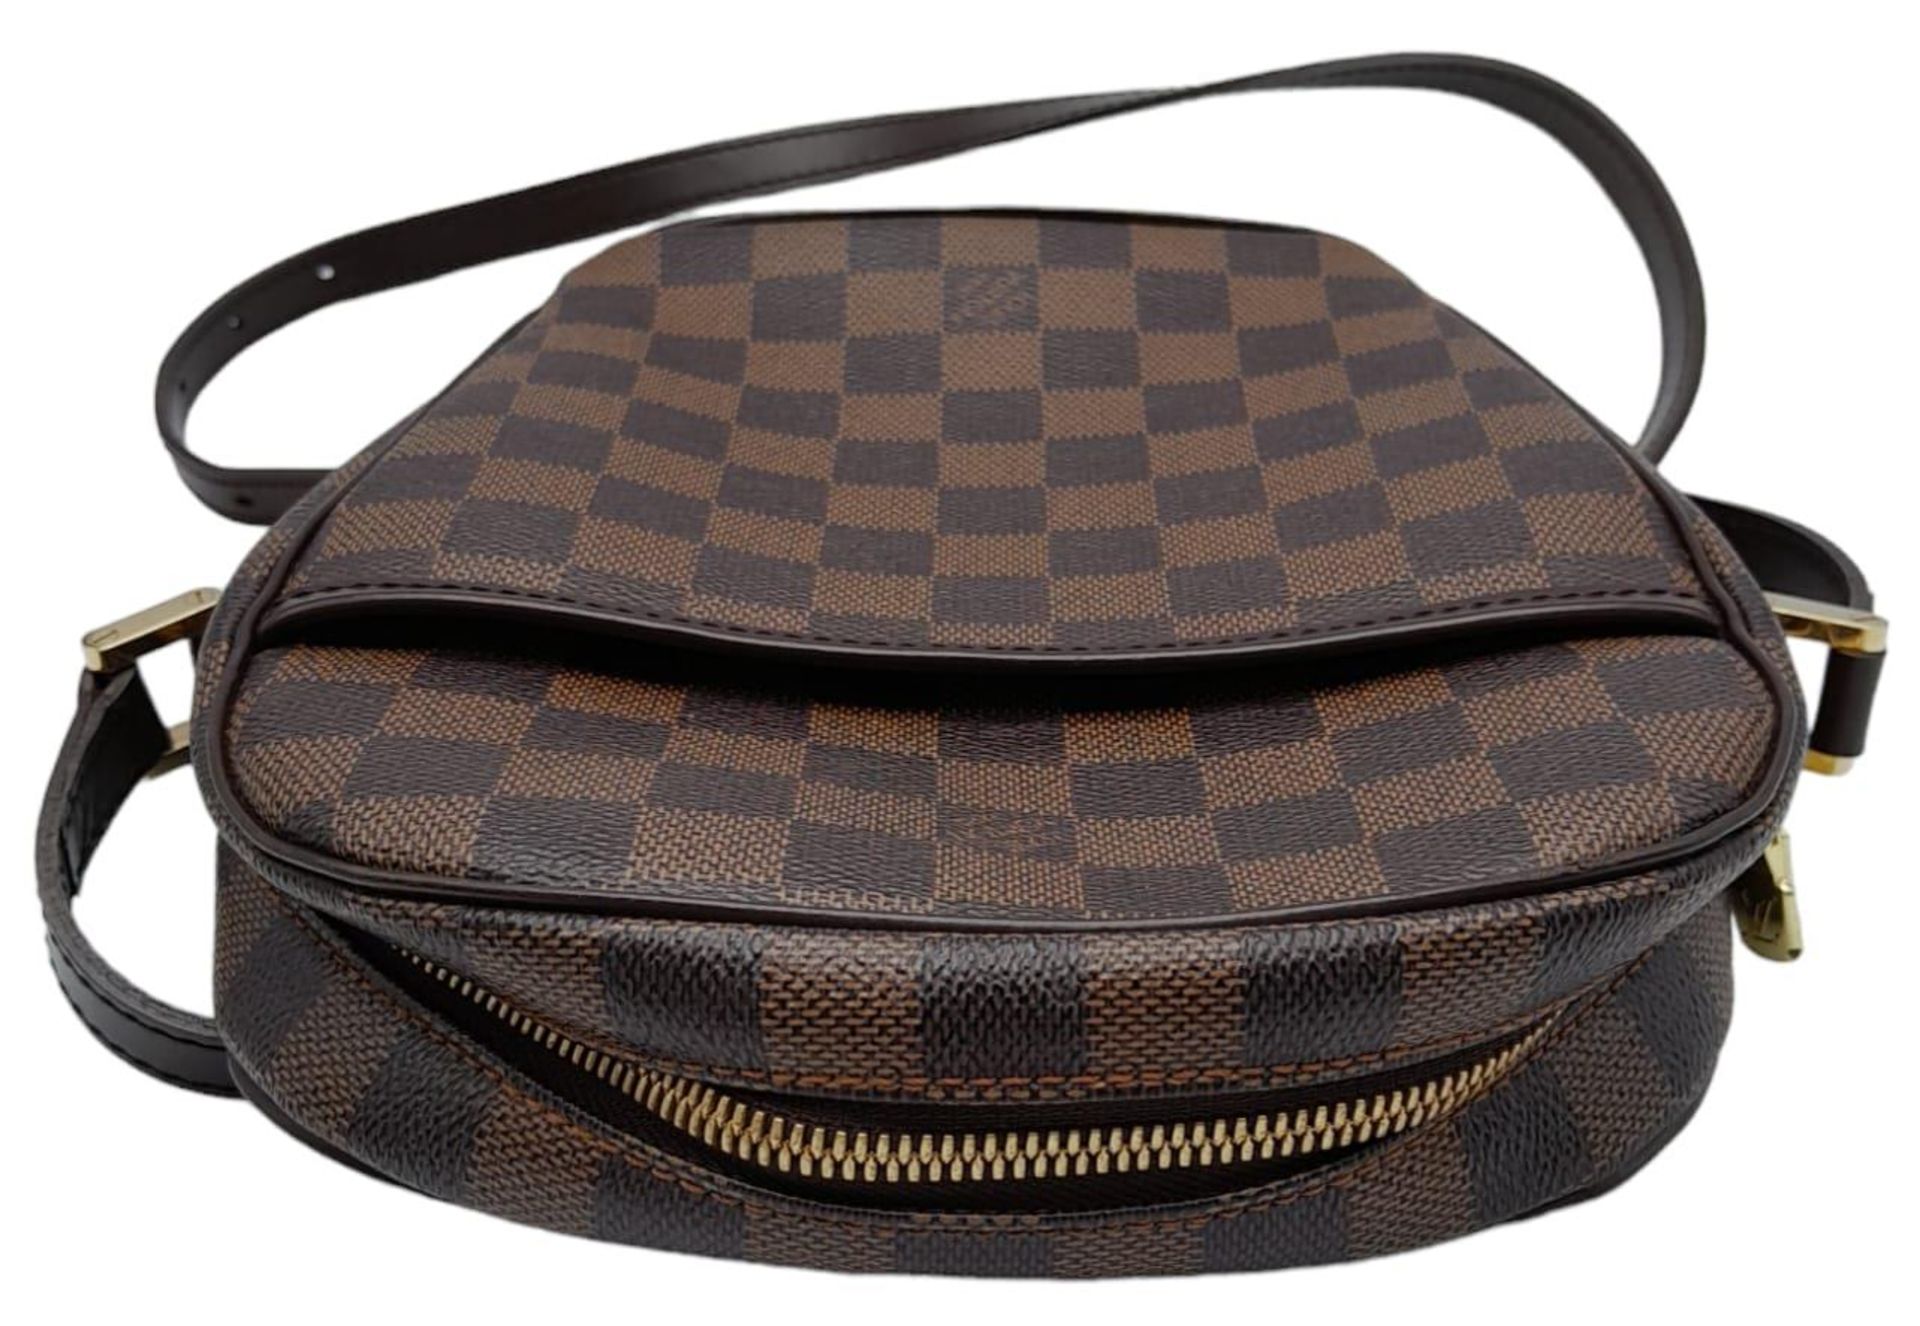 A Louis Vuitton Damier Ebene 'Ipanema' Crossbody Bag. Leather exterior with gold-toned hardware, - Image 4 of 8